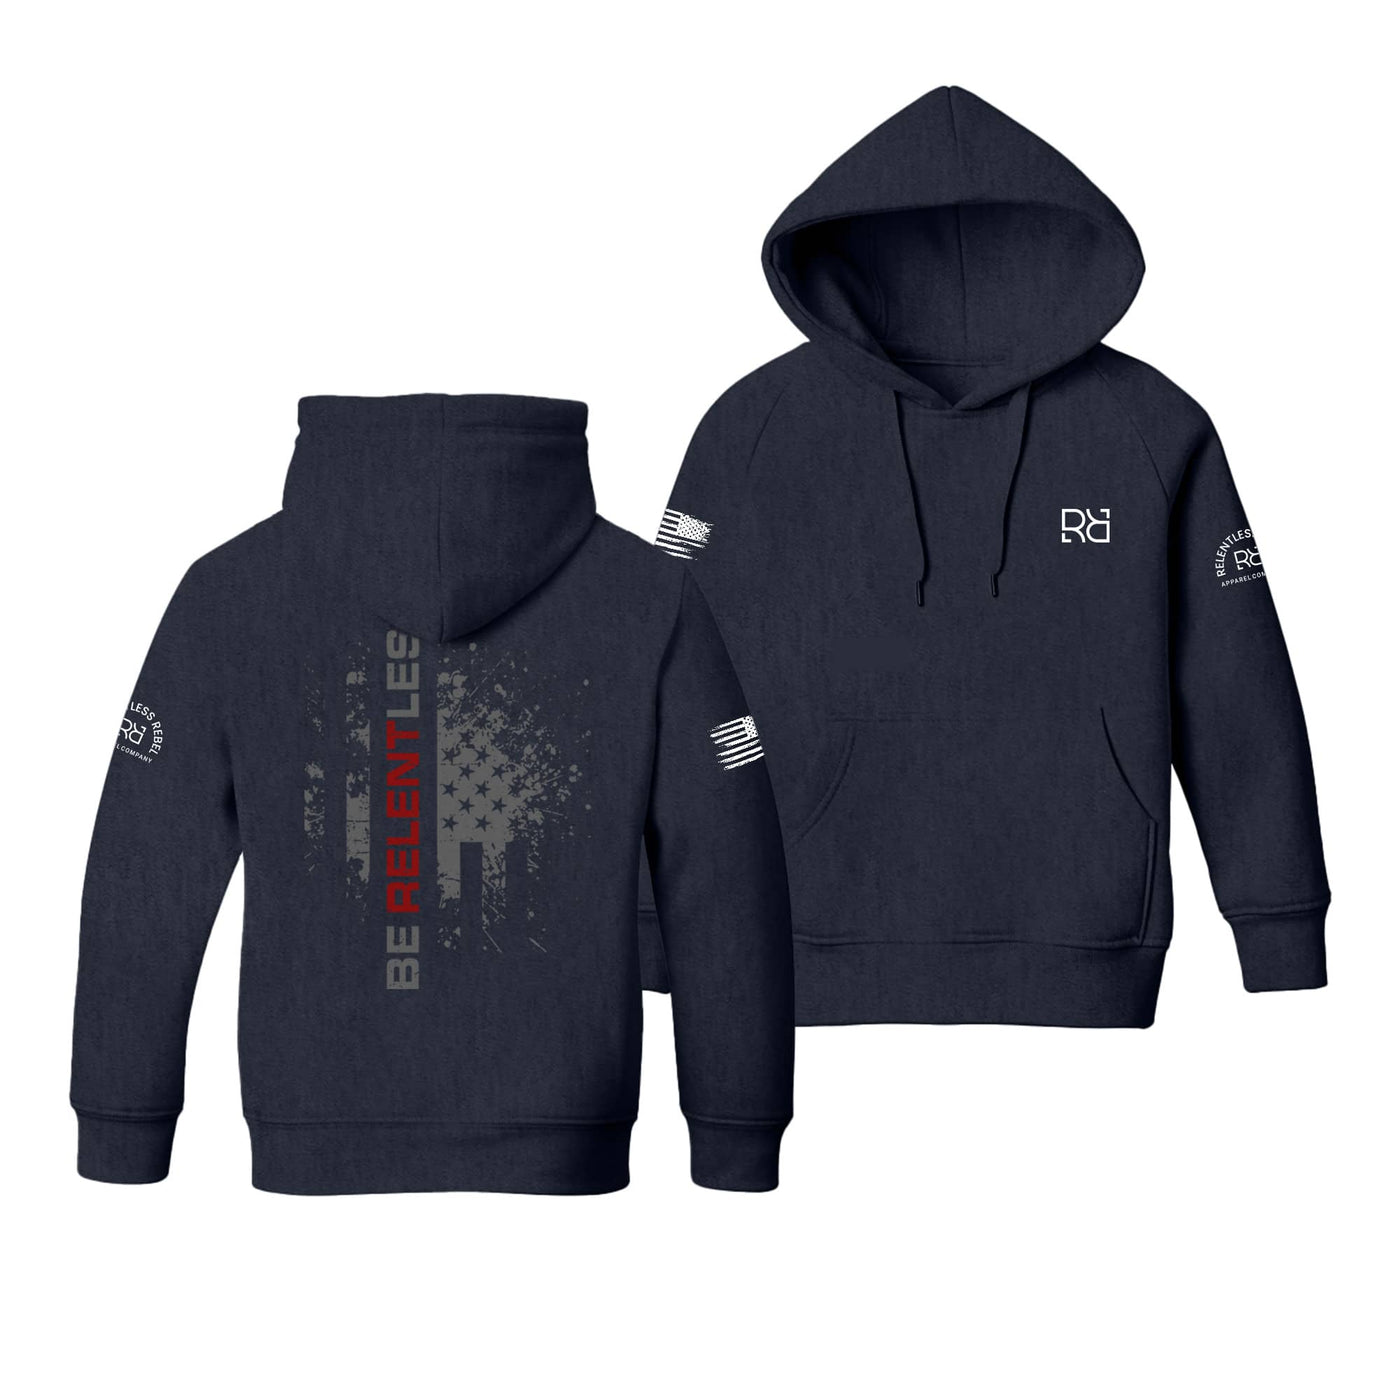 Navy Youth Be Relentless Back Design Hoodie